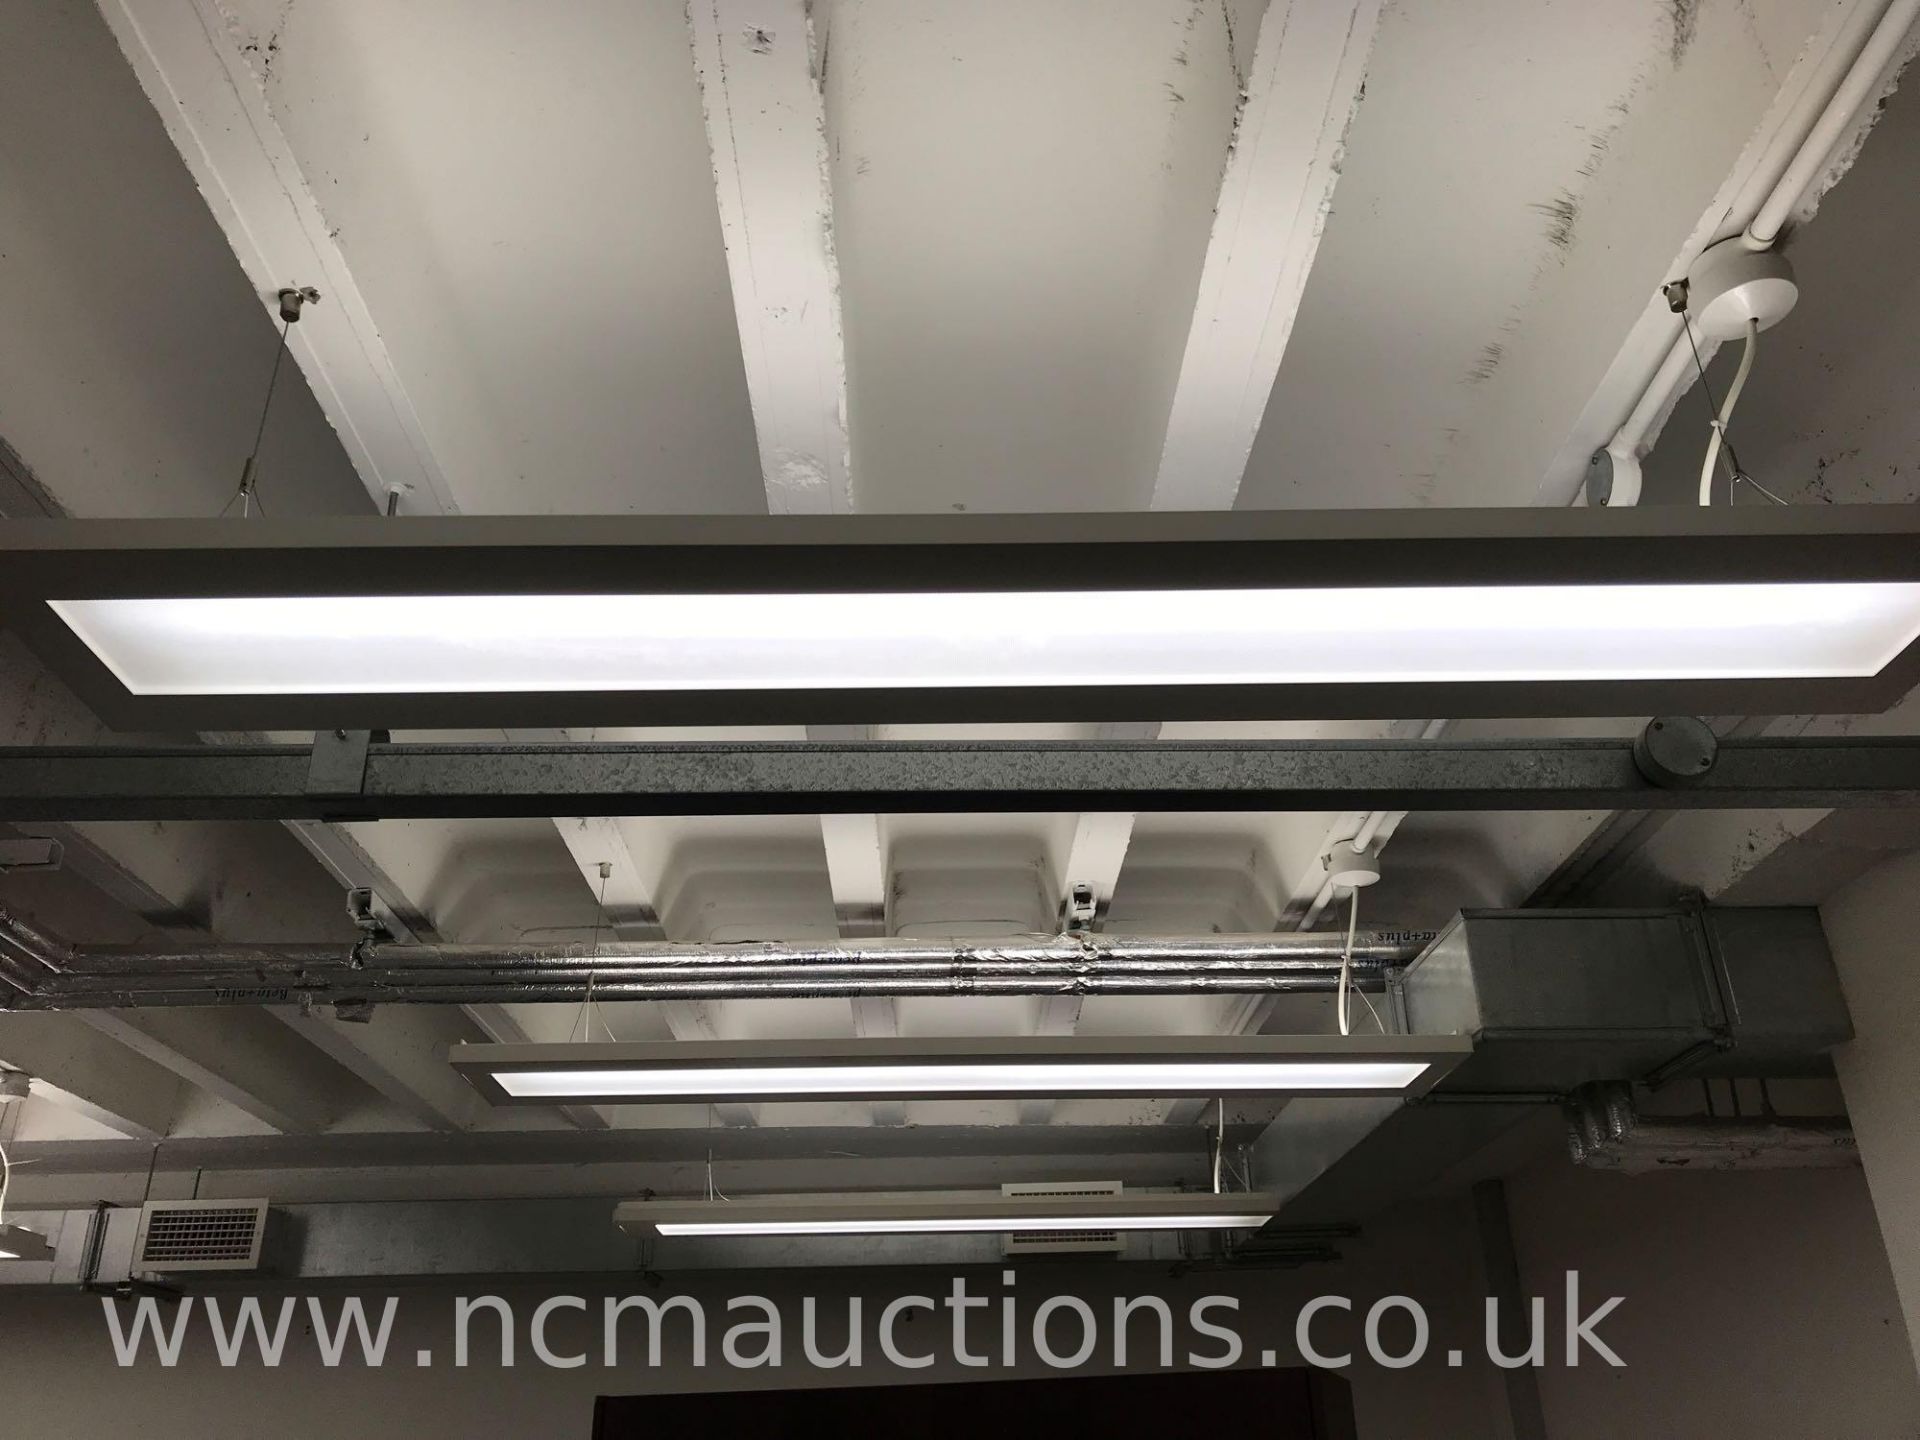 19x Suspended ceiling lights